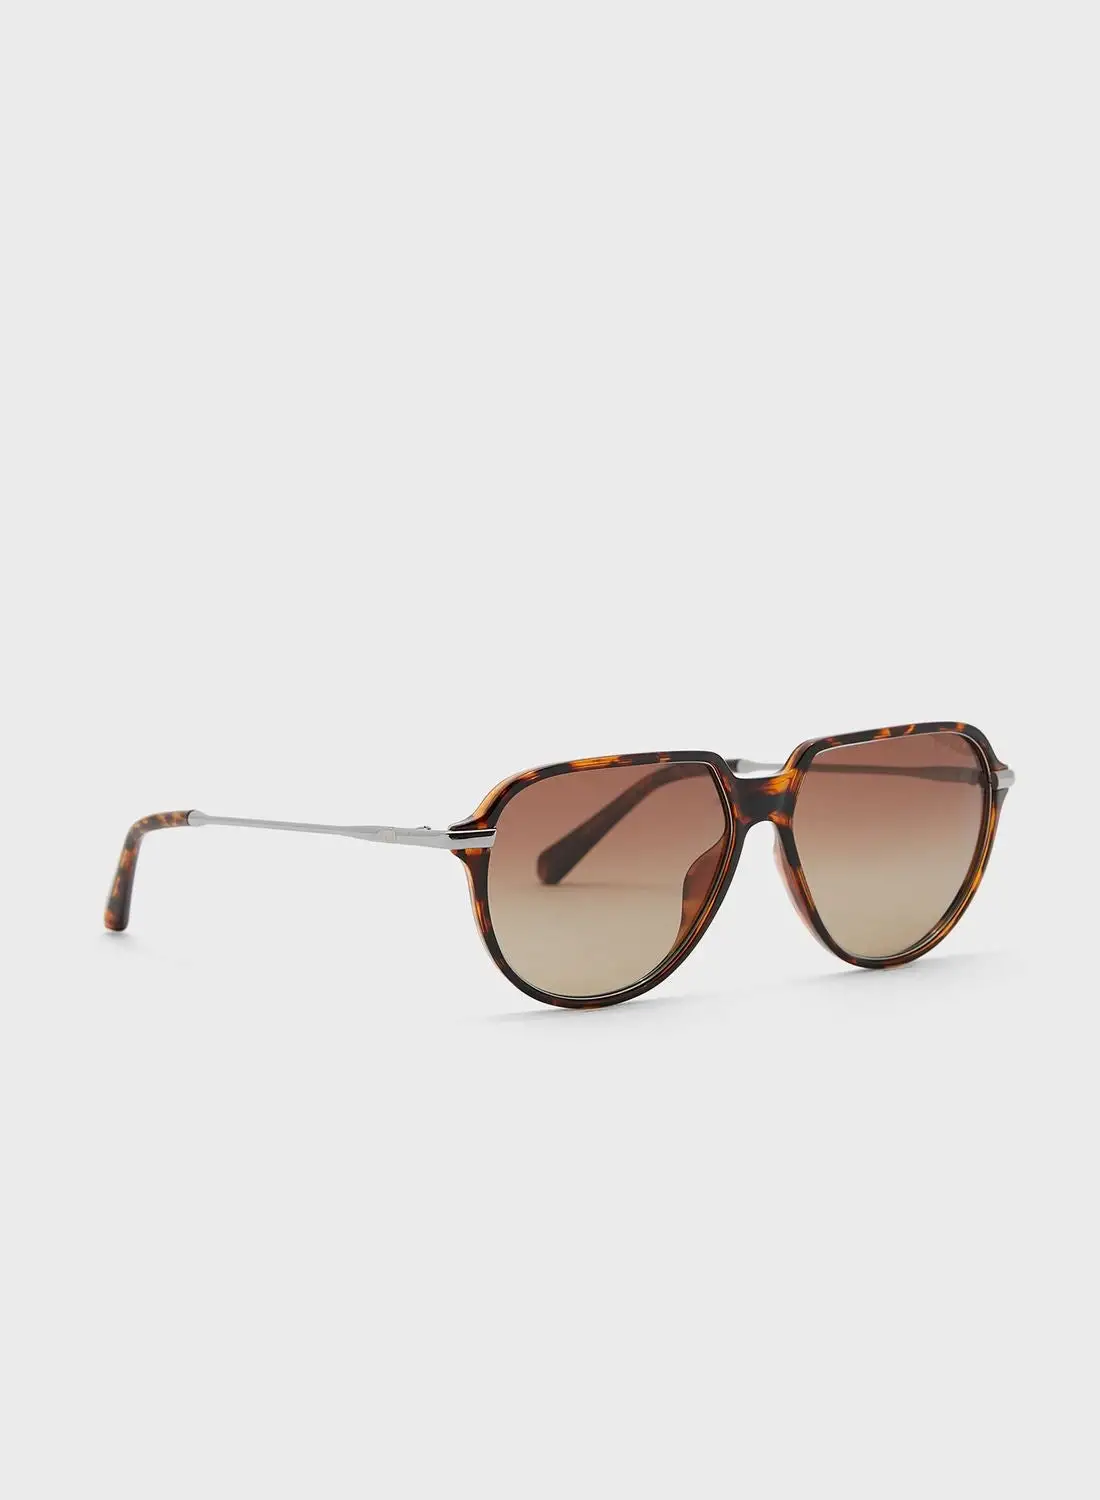 GUESS Injected Aviator Sunglasses